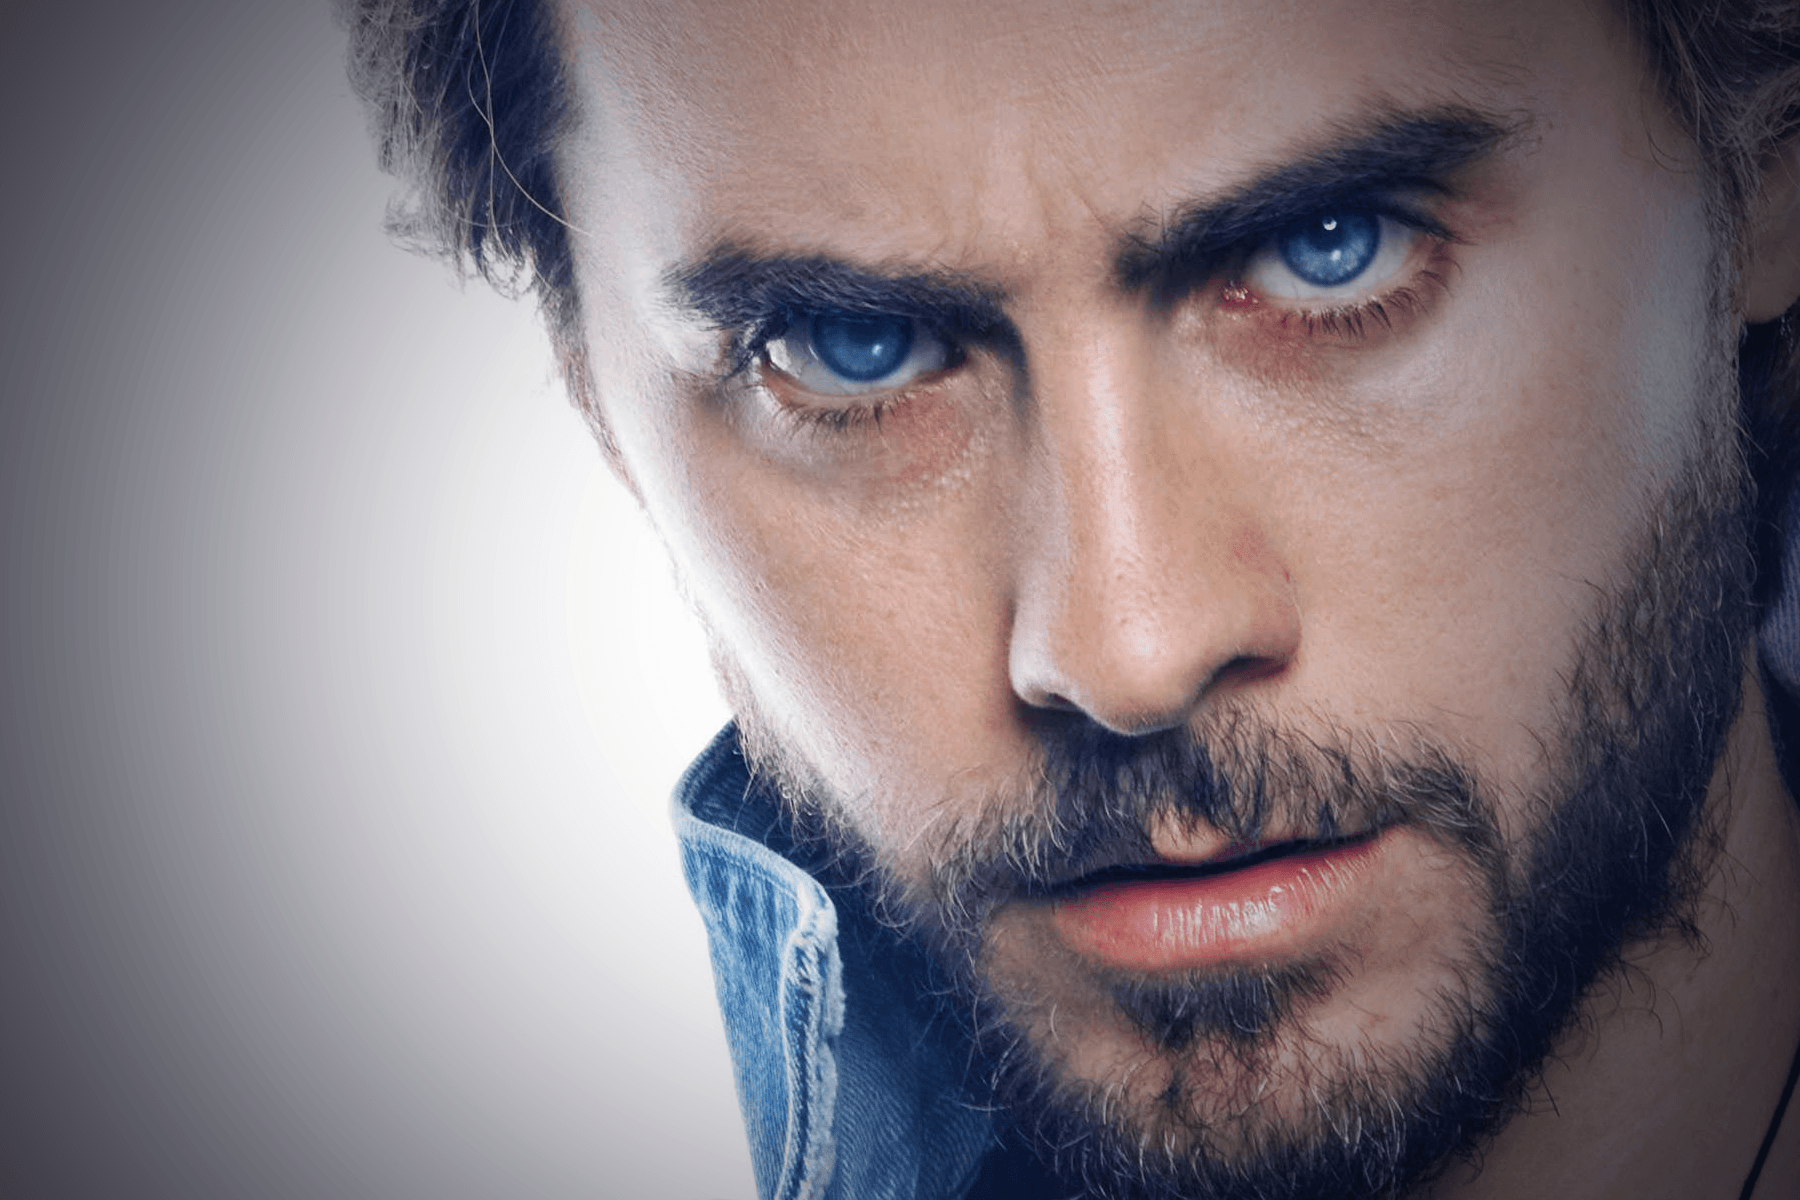 Jared Leto Wallpaper High Resolution and Quality Download